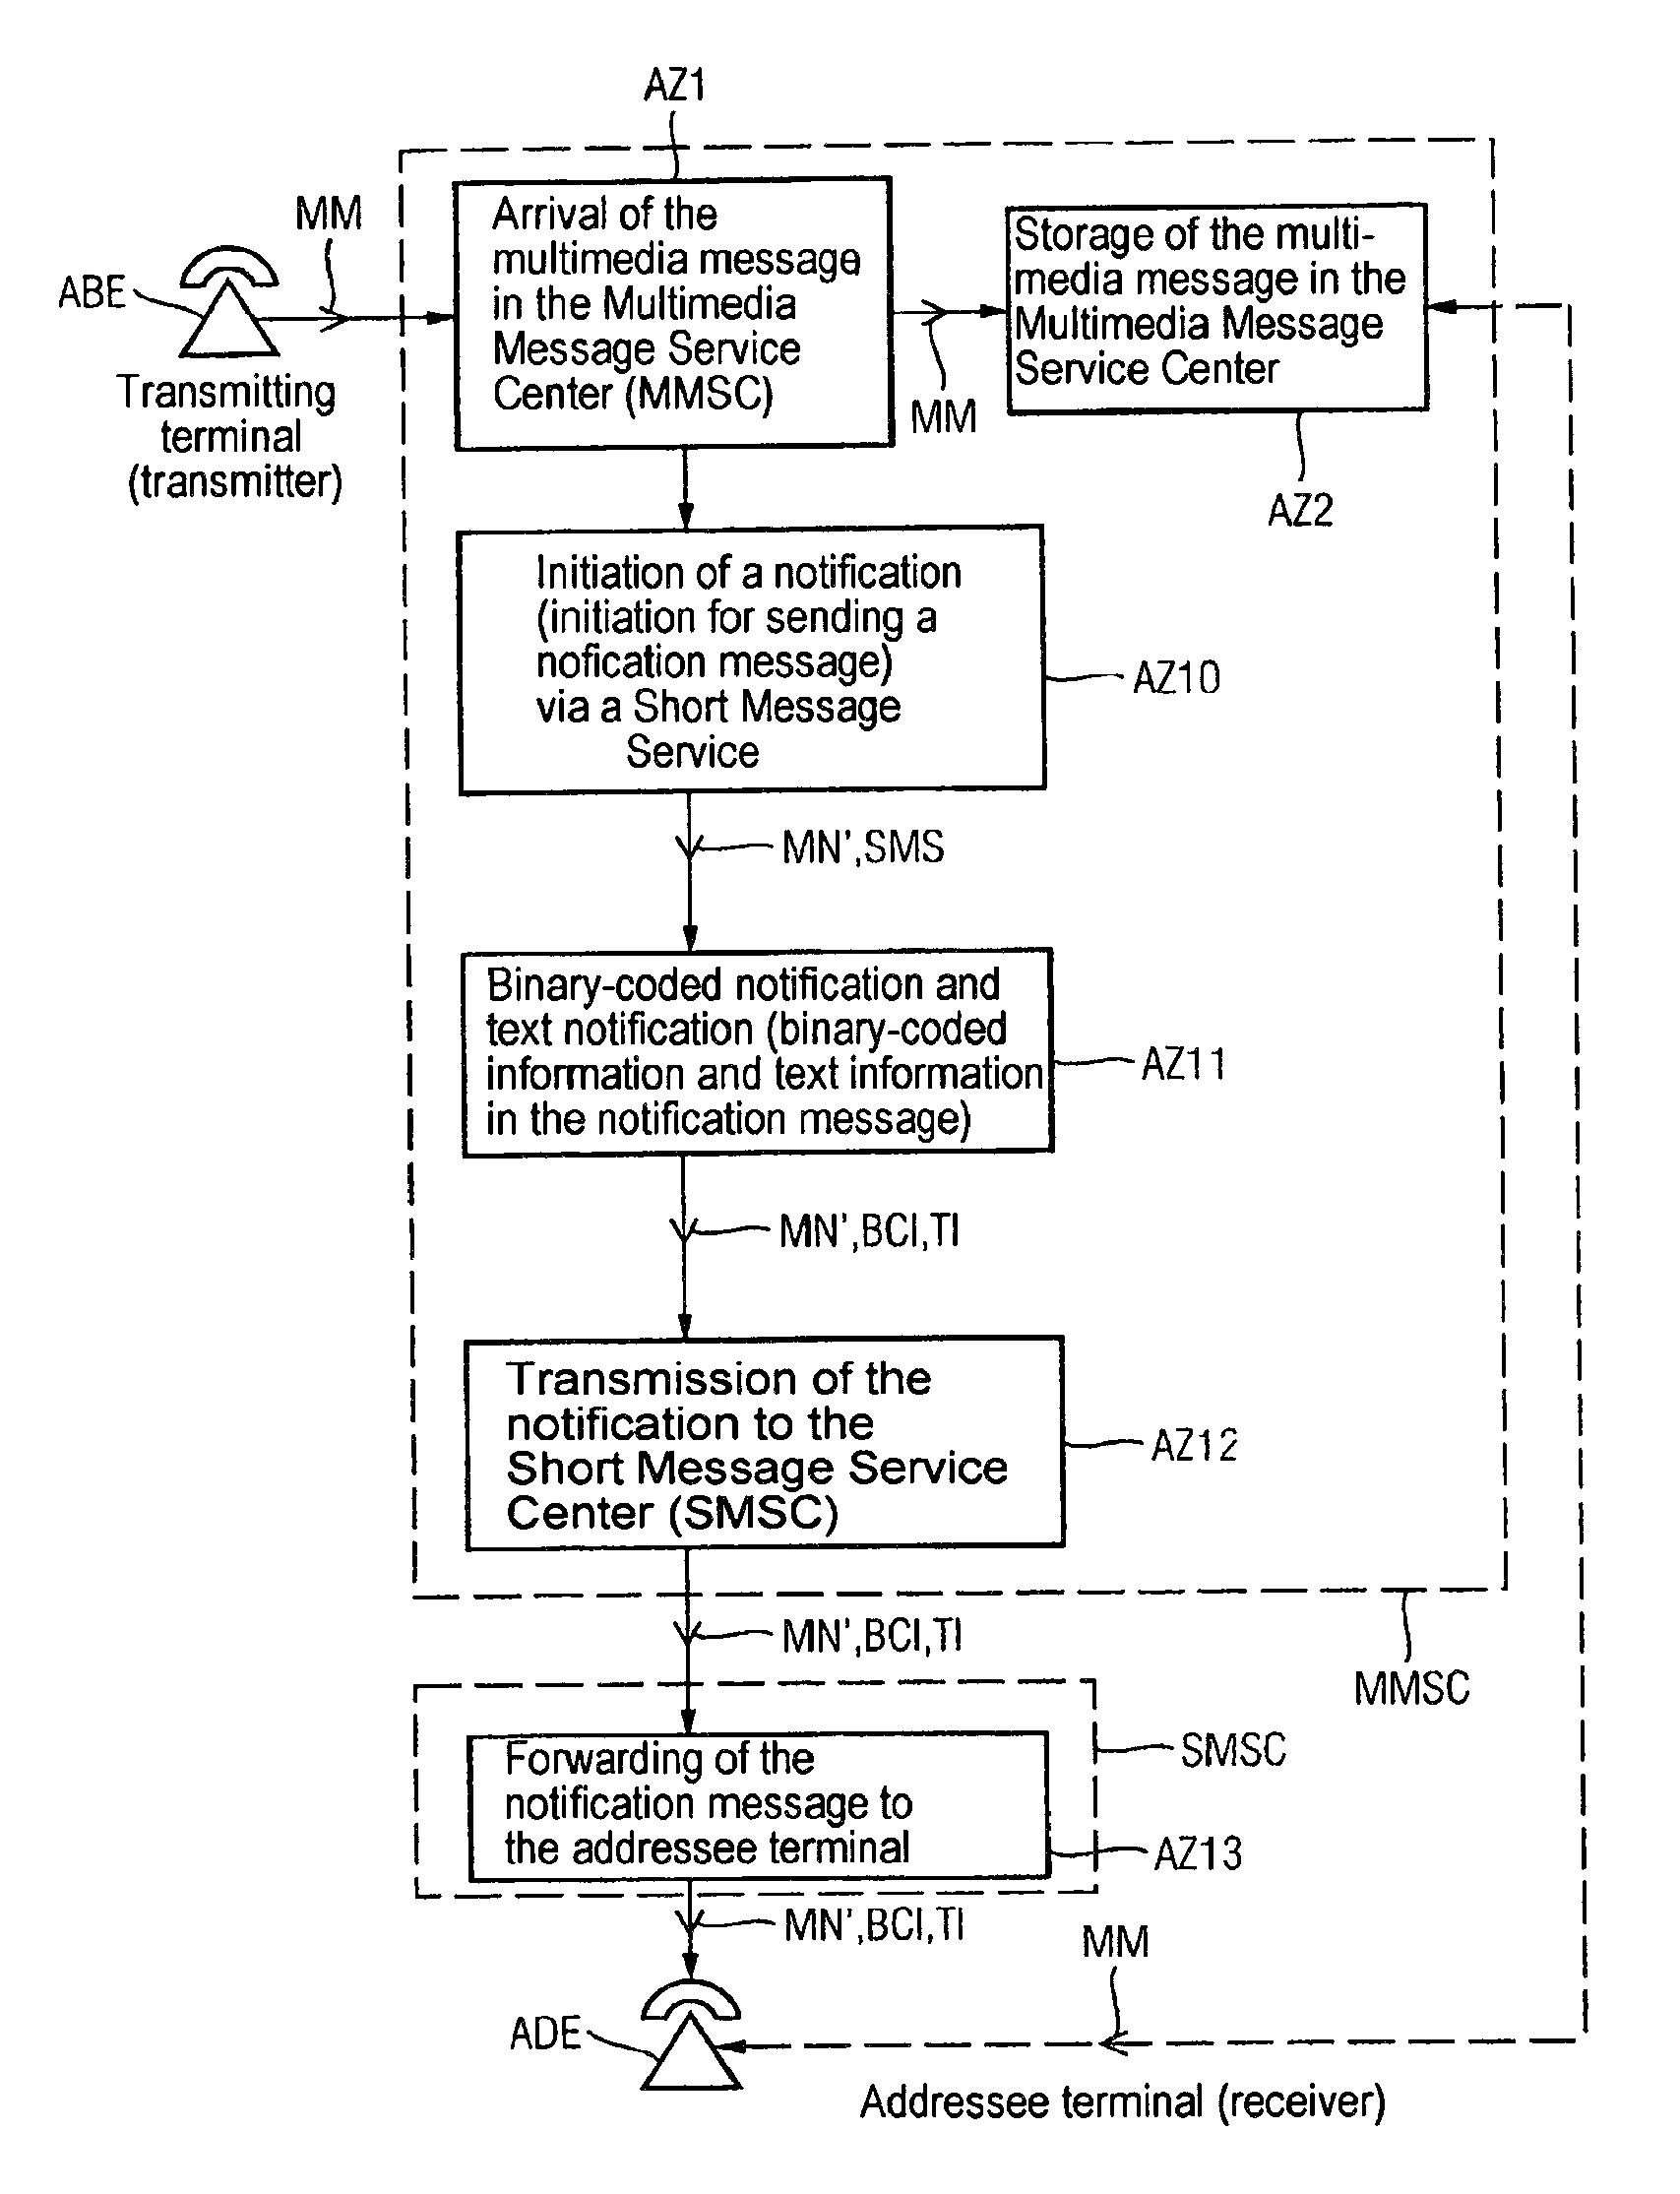 Method for transmitting notification messages on submitting multimedia messages to telecommunications devices embodied as multimedia message sinks